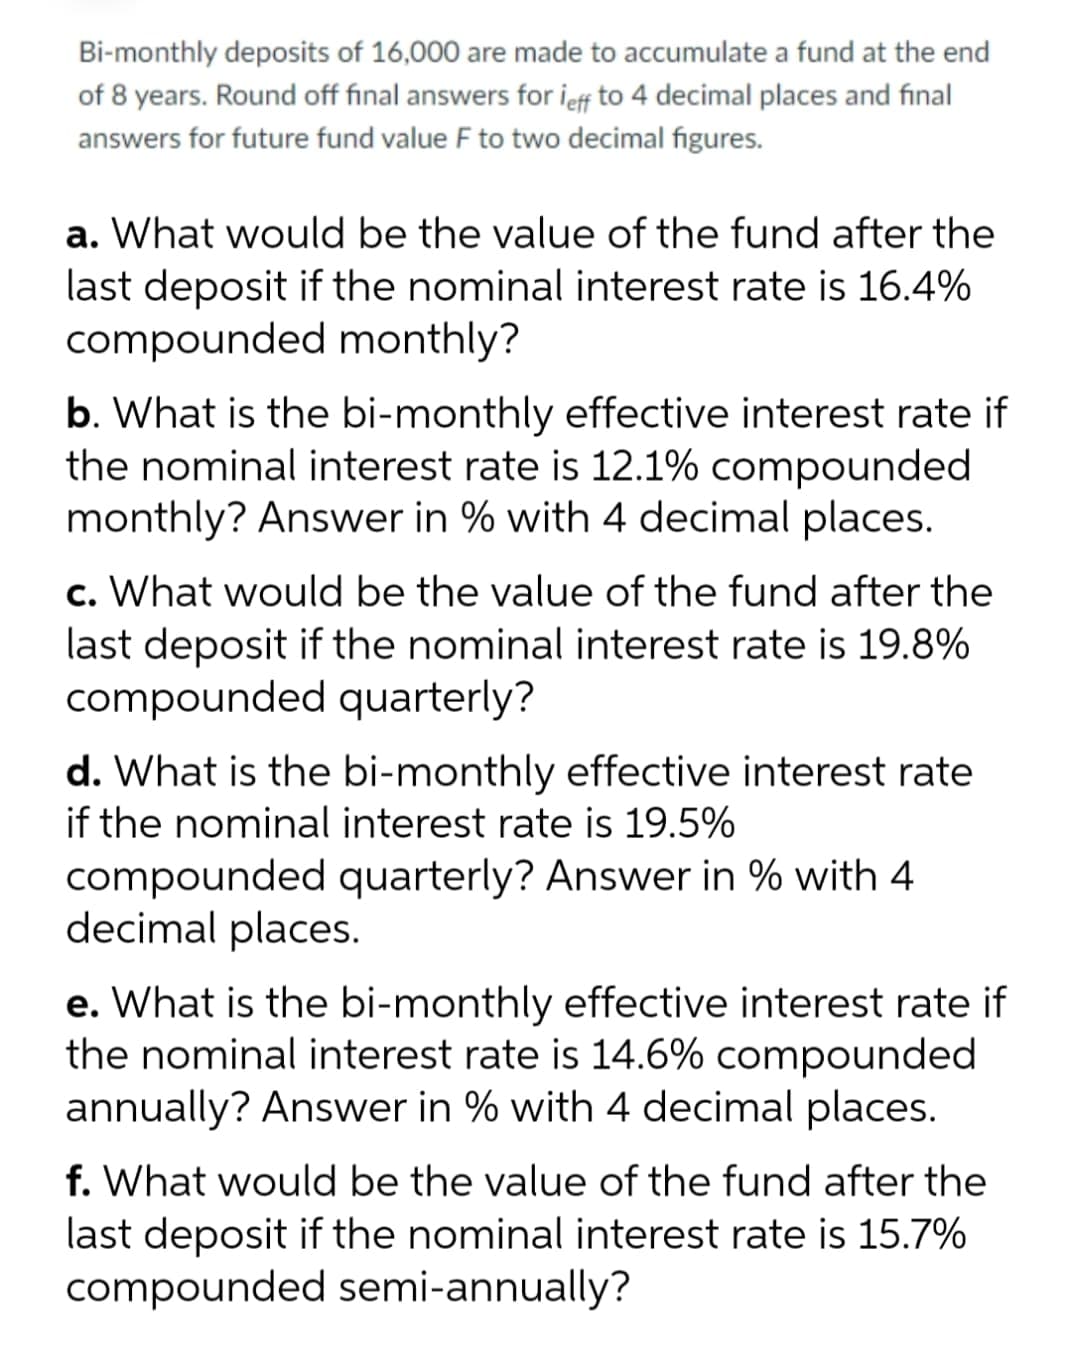 Bi-monthly deposits of 16,000 are made to accumulate a fund at the end
of 8 years. Round off final answers for leff to 4 decimal places and final
answers for future fund value F to two decimal figures.
a. What would be the value of the fund after the
last deposit if the nominal interest rate is 16.4%
compounded monthly?
b. What is the bi-monthly effective interest rate if
the nominal interest rate is 12.1% compounded
monthly? Answer in % with 4 decimal places.
c. What would be the value of the fund after the
last deposit if the nominal interest rate is 19.8%
compounded quarterly?
d. What is the bi-monthly effective interest rate
if the nominal interest rate is 19.5%
compounded quarterly? Answer in % with 4
decimal places.
e. What is the bi-monthly effective interest rate if
the nominal interest rate is 14.6% compounded
annually? Answer in % with 4 decimal places.
f. What would be the value of the fund after the
last deposit if the nominal interest rate is 15.7%
compounded semi-annually?